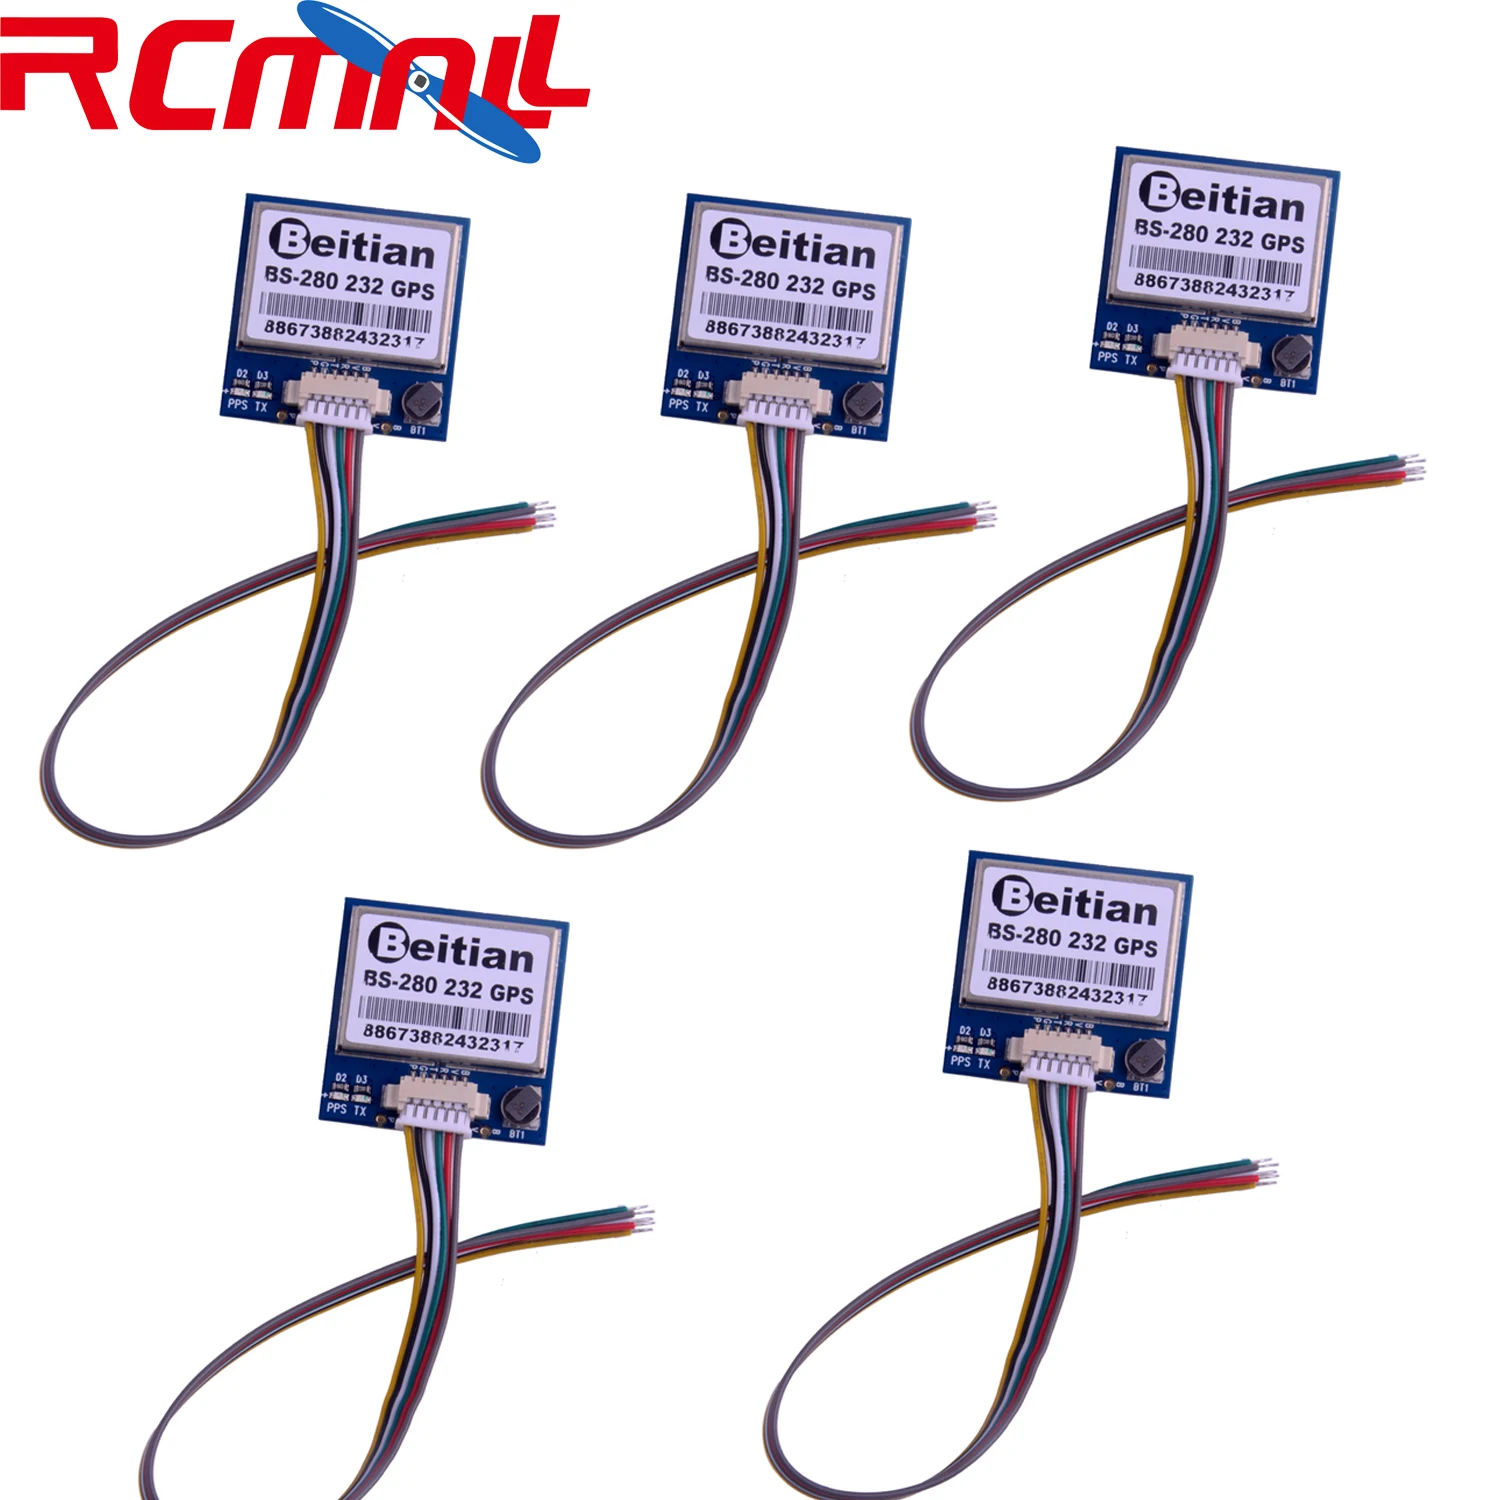 5Pcs Beitian BS-280 GPS Module 7th Generation BS280 with Antenna RS232, for Positioning Tracking, Default 9600bps RCmall